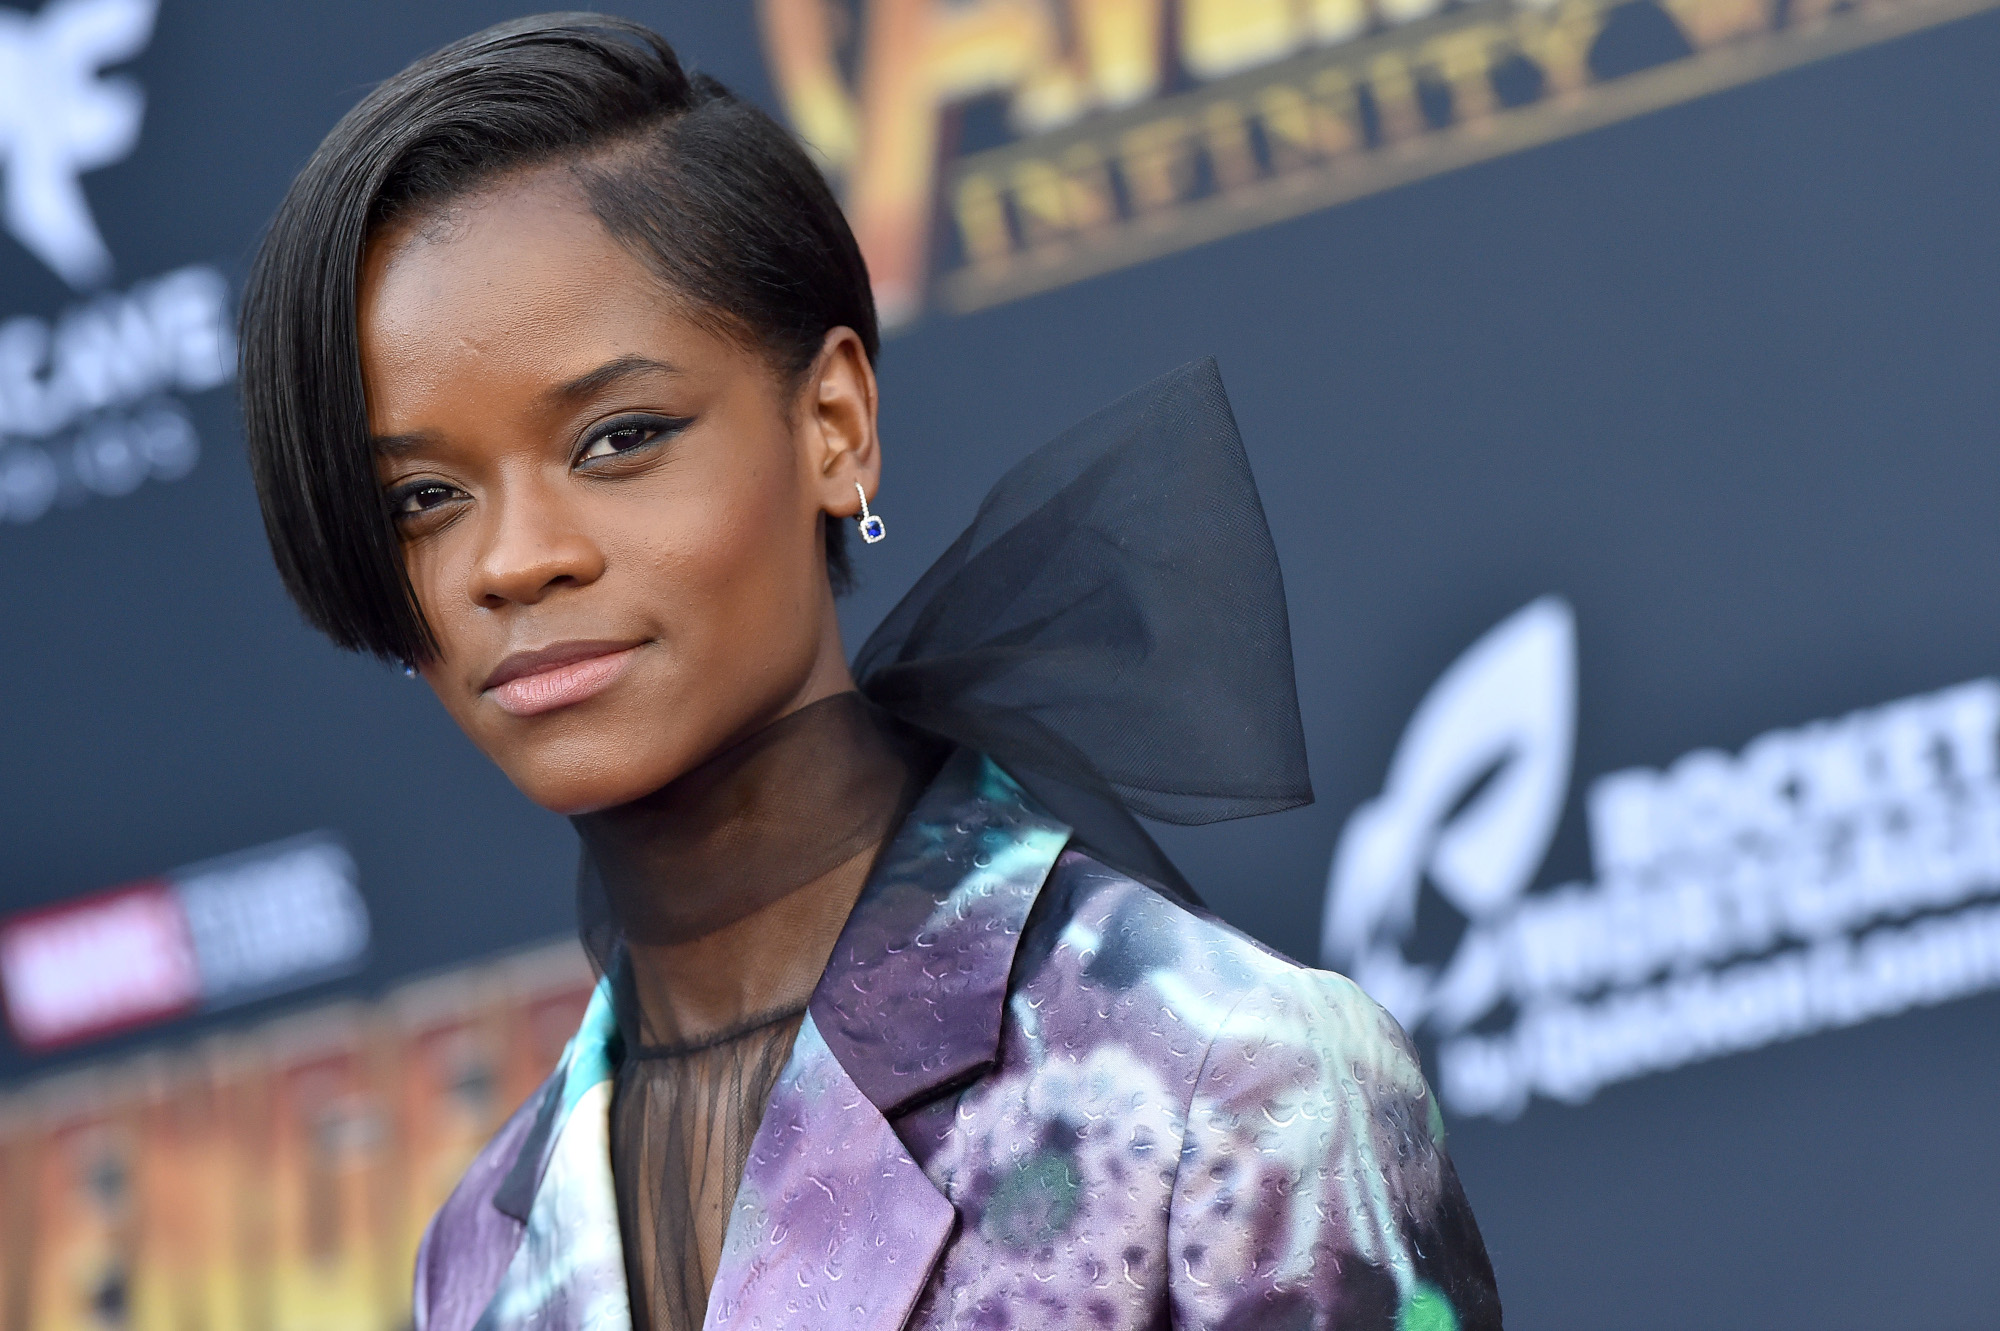 'Black Panther: Wakanda Forever' star Letitia Wright. She's wearing a black, purple, and blue blazer.